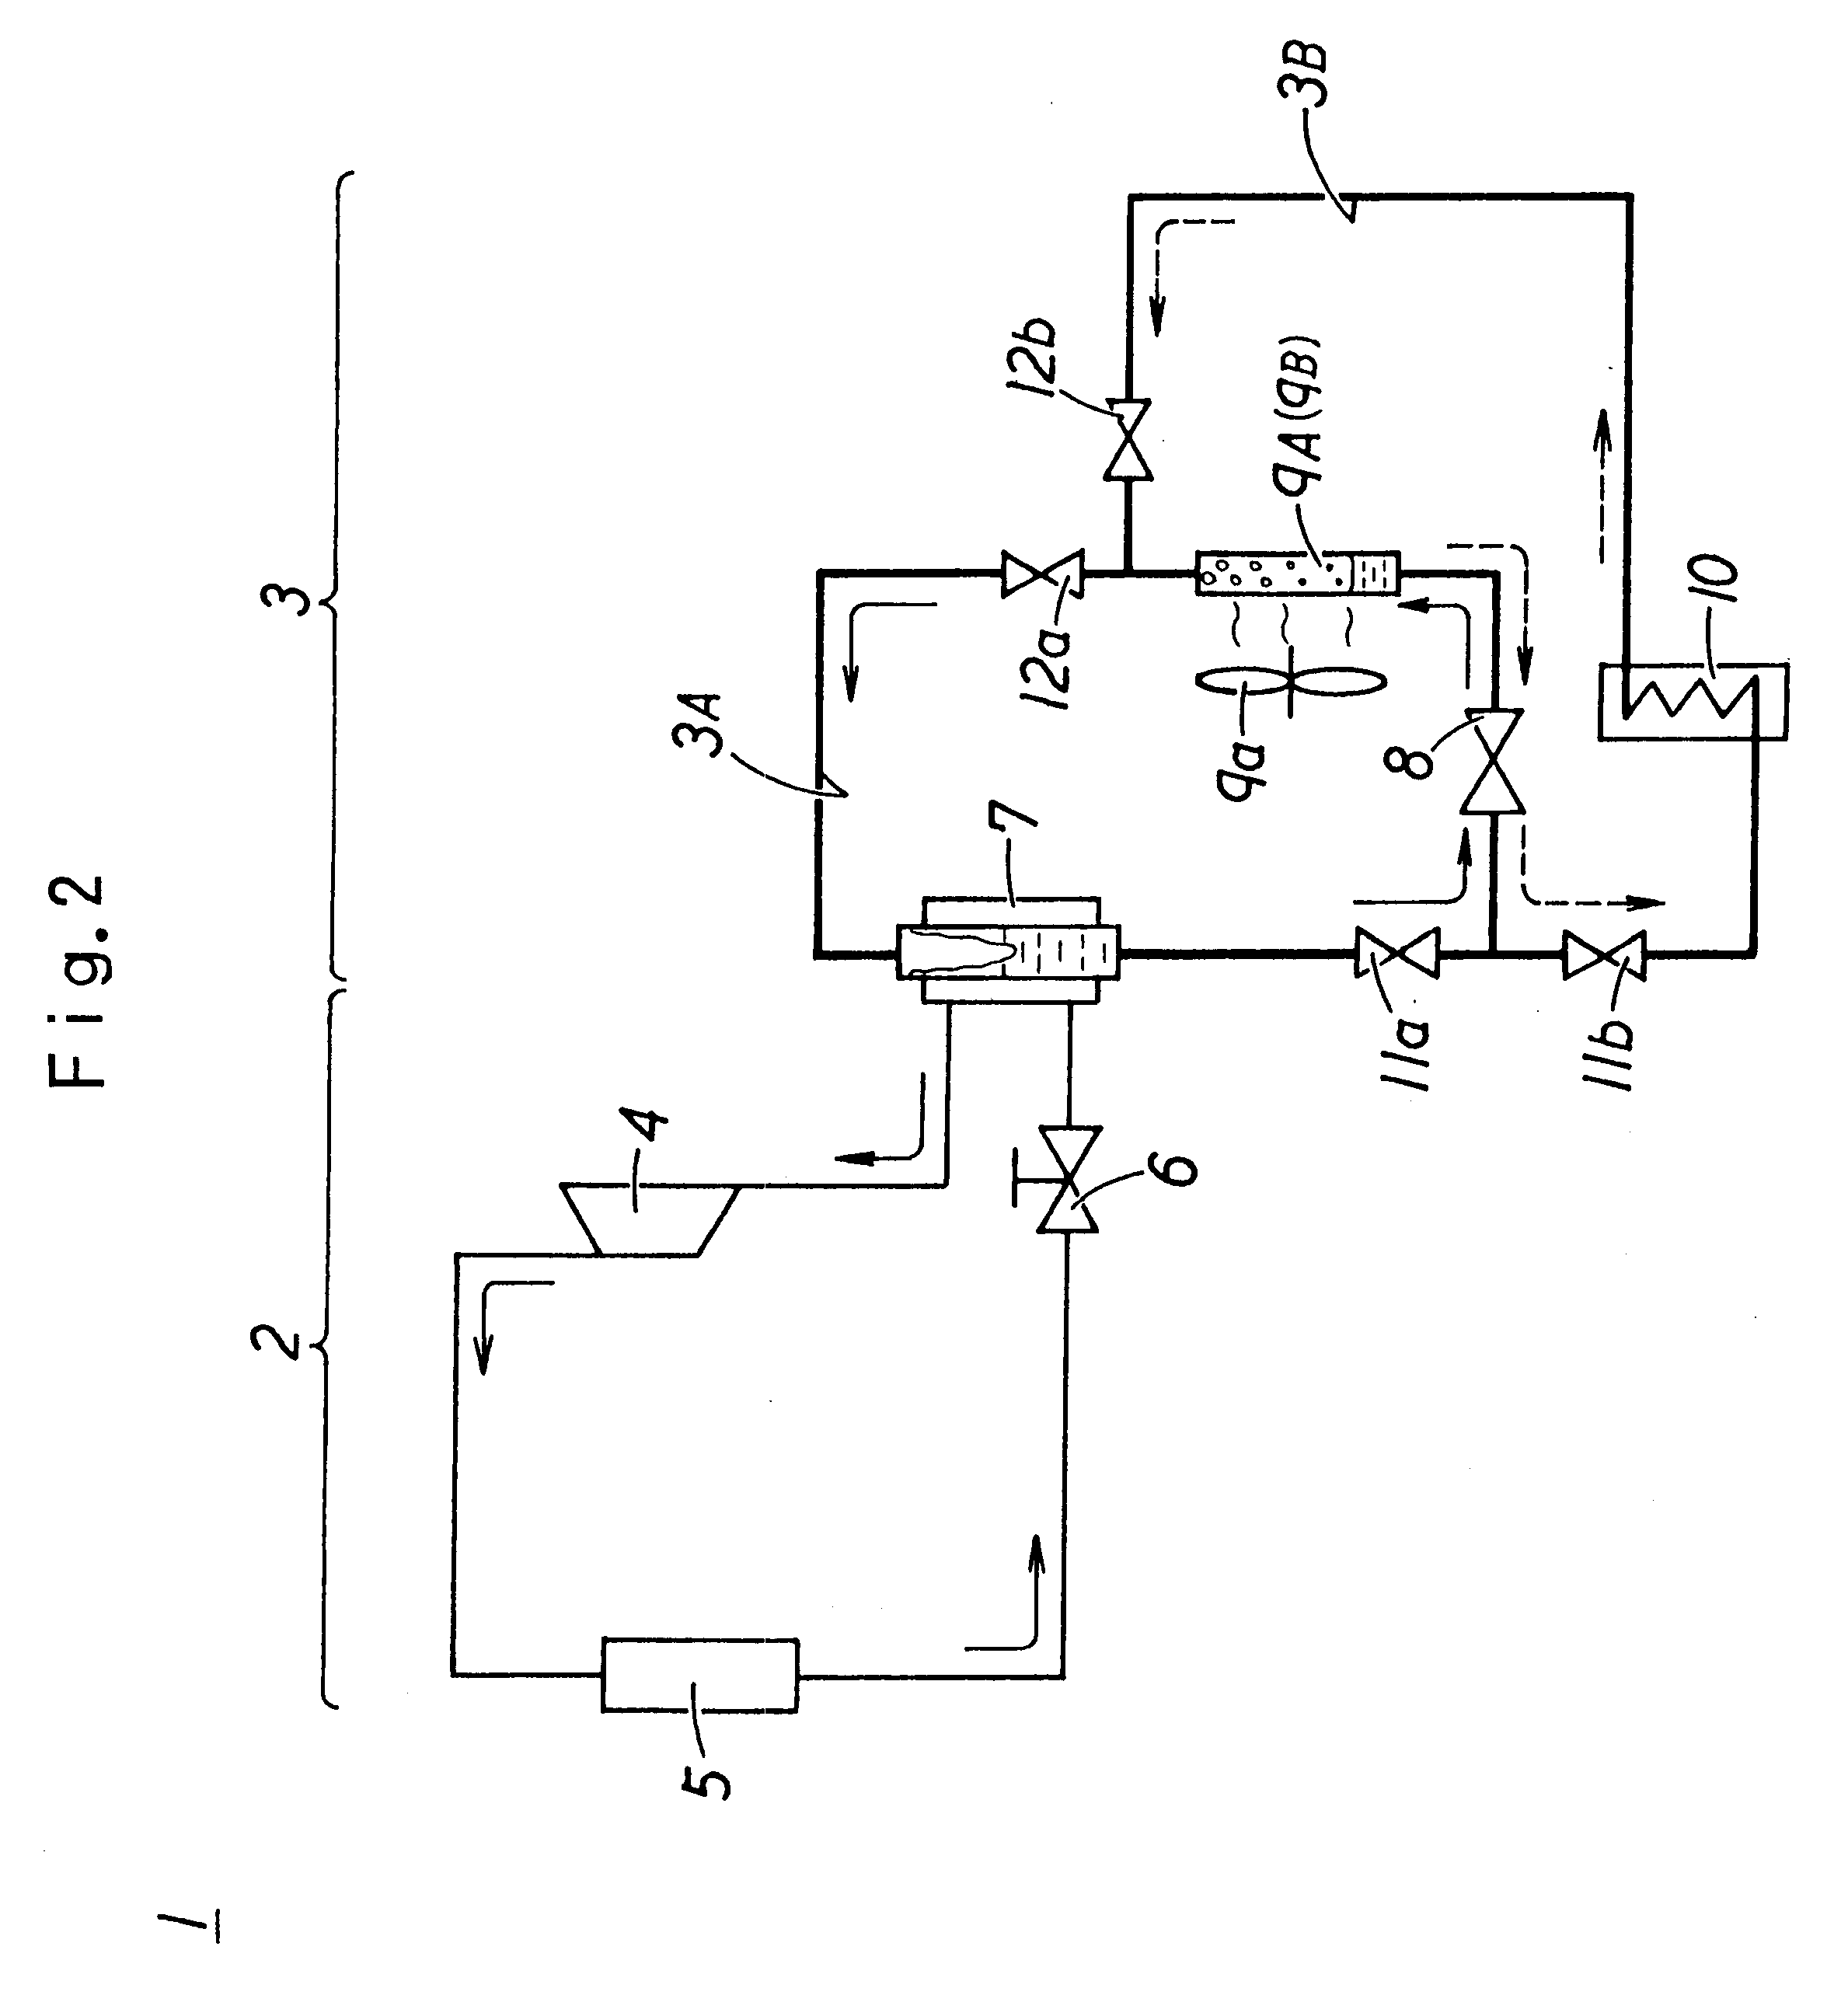 Heat pump system of combination of ammonia cycle carbon dioxide cycle